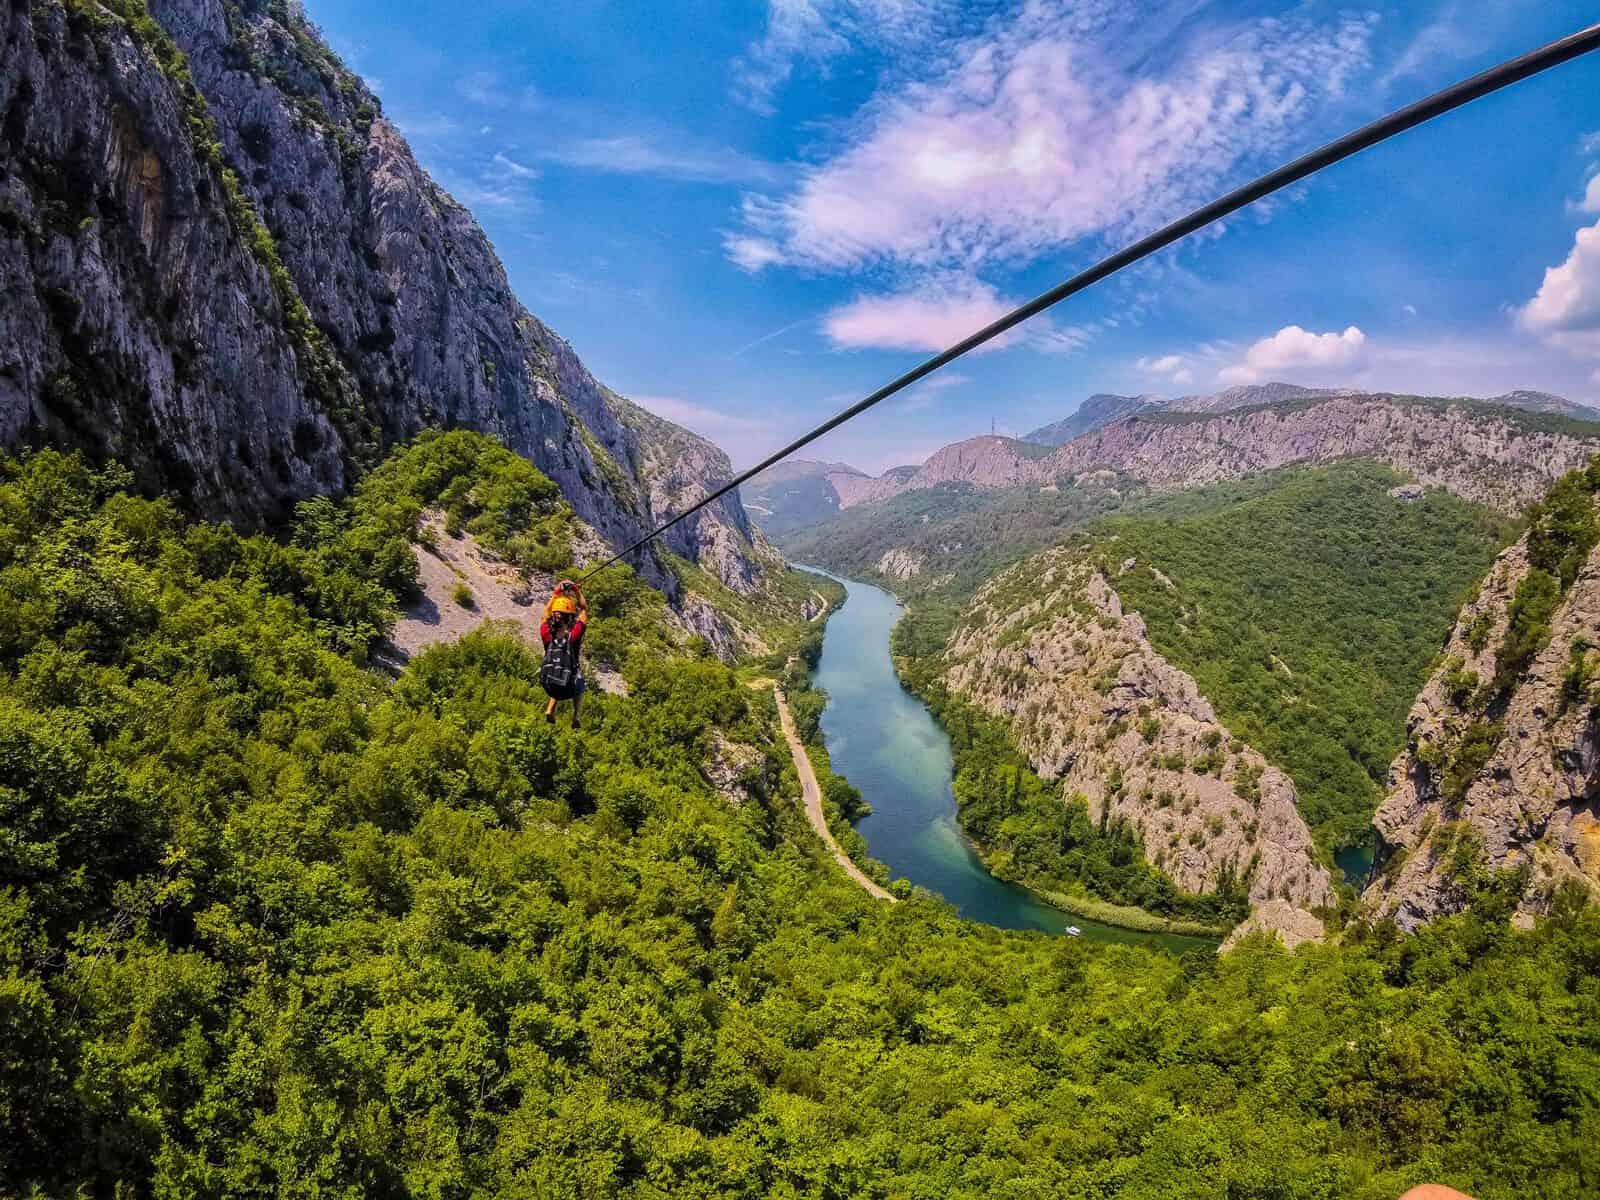 Nina zip-lining over the Centina River hundreds of feet in the air in the Croatian mountains of Omis.